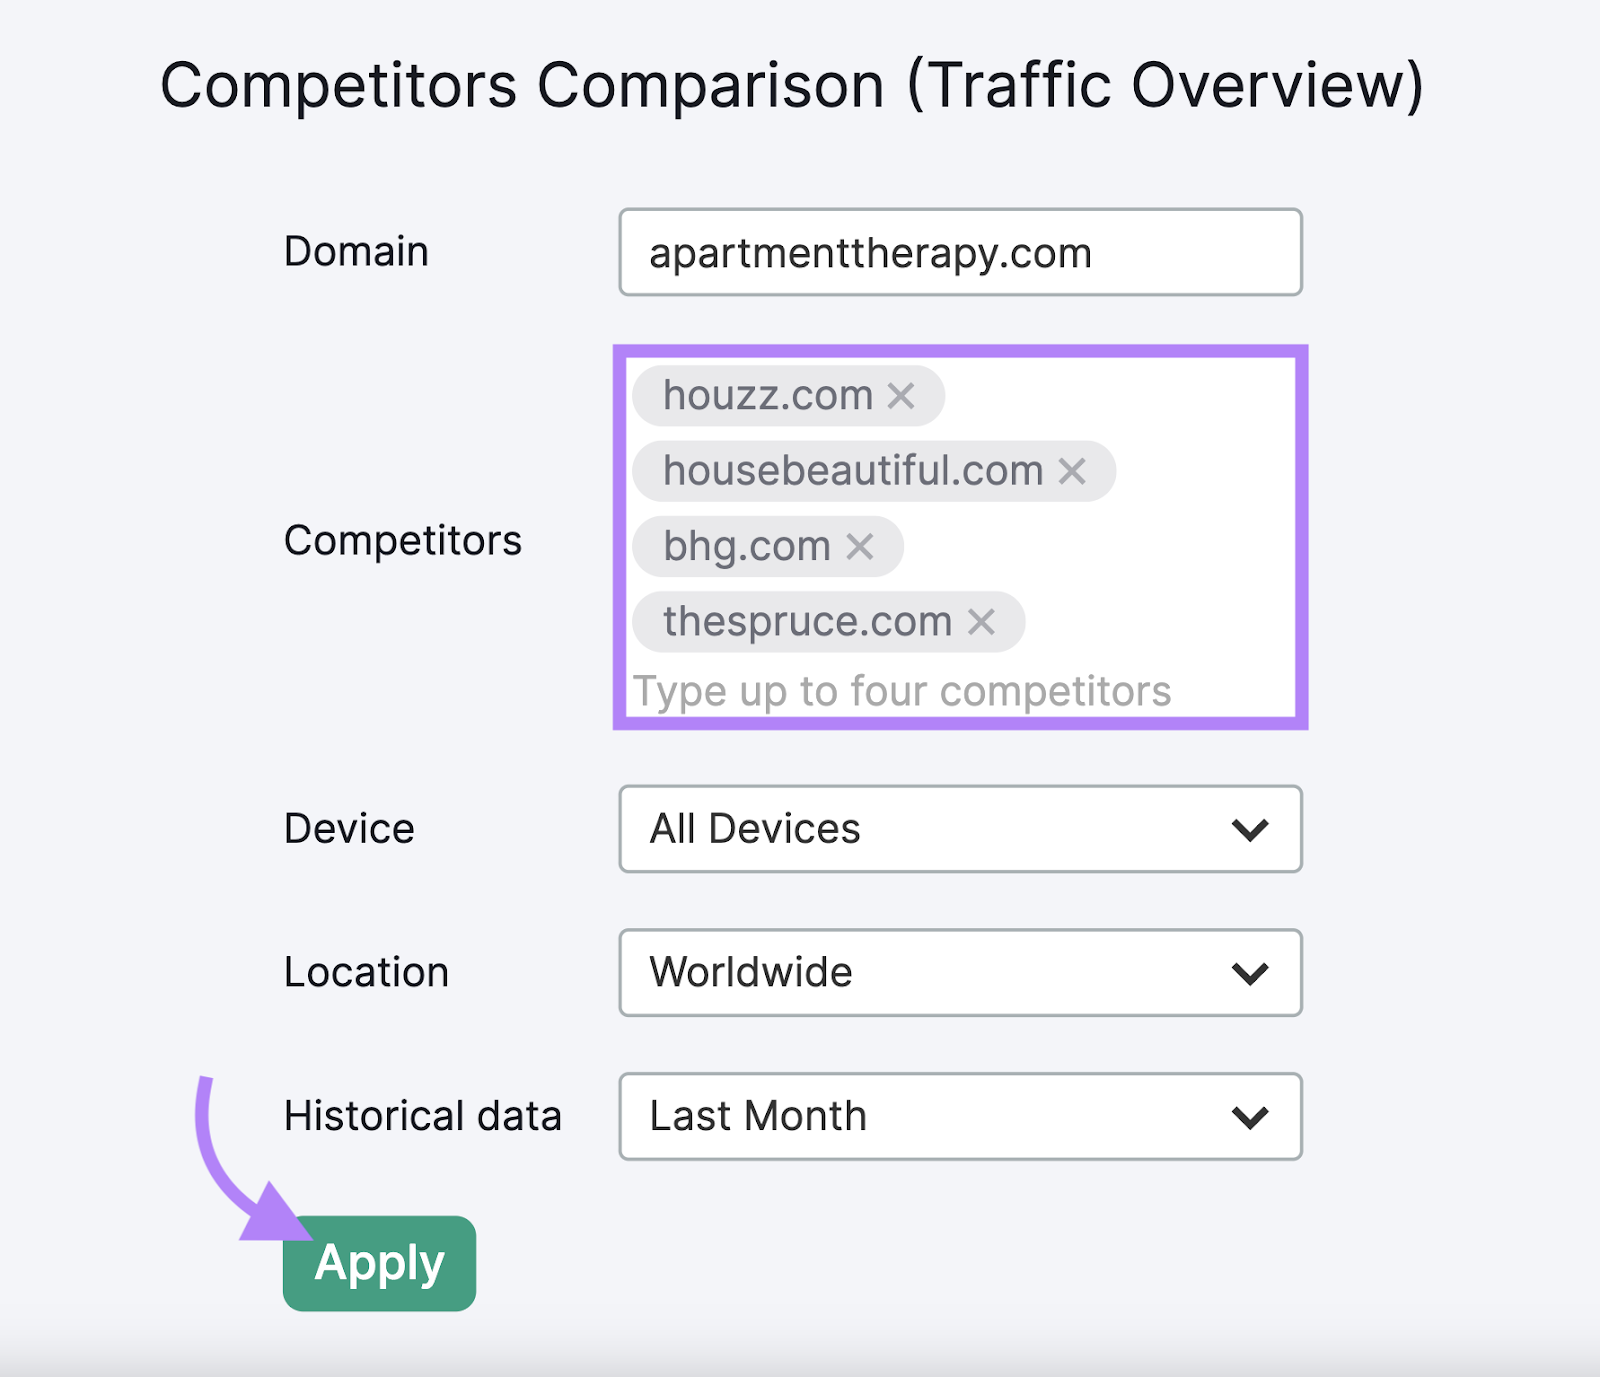 Competitors added under the "Competitors Comparison (Traffic Overview)" pop-up window